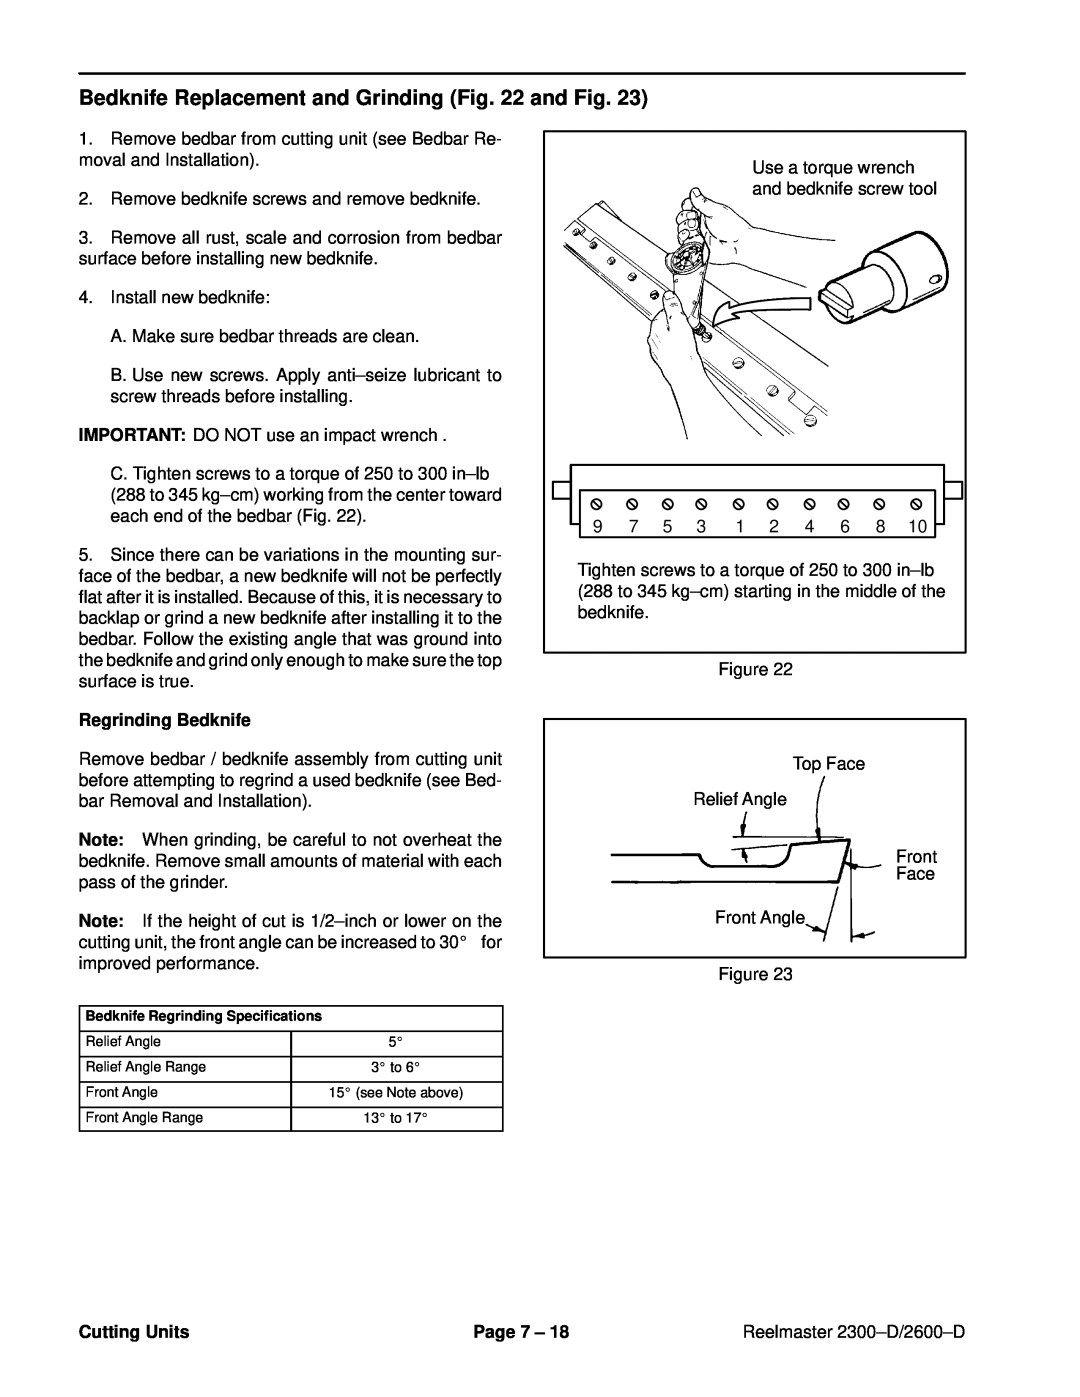 Toro 2300-D, 2600D service manual Bedknife Replacement and Grinding and Fig, Regrinding Bedknife, Cutting Units, Page 7 ± 